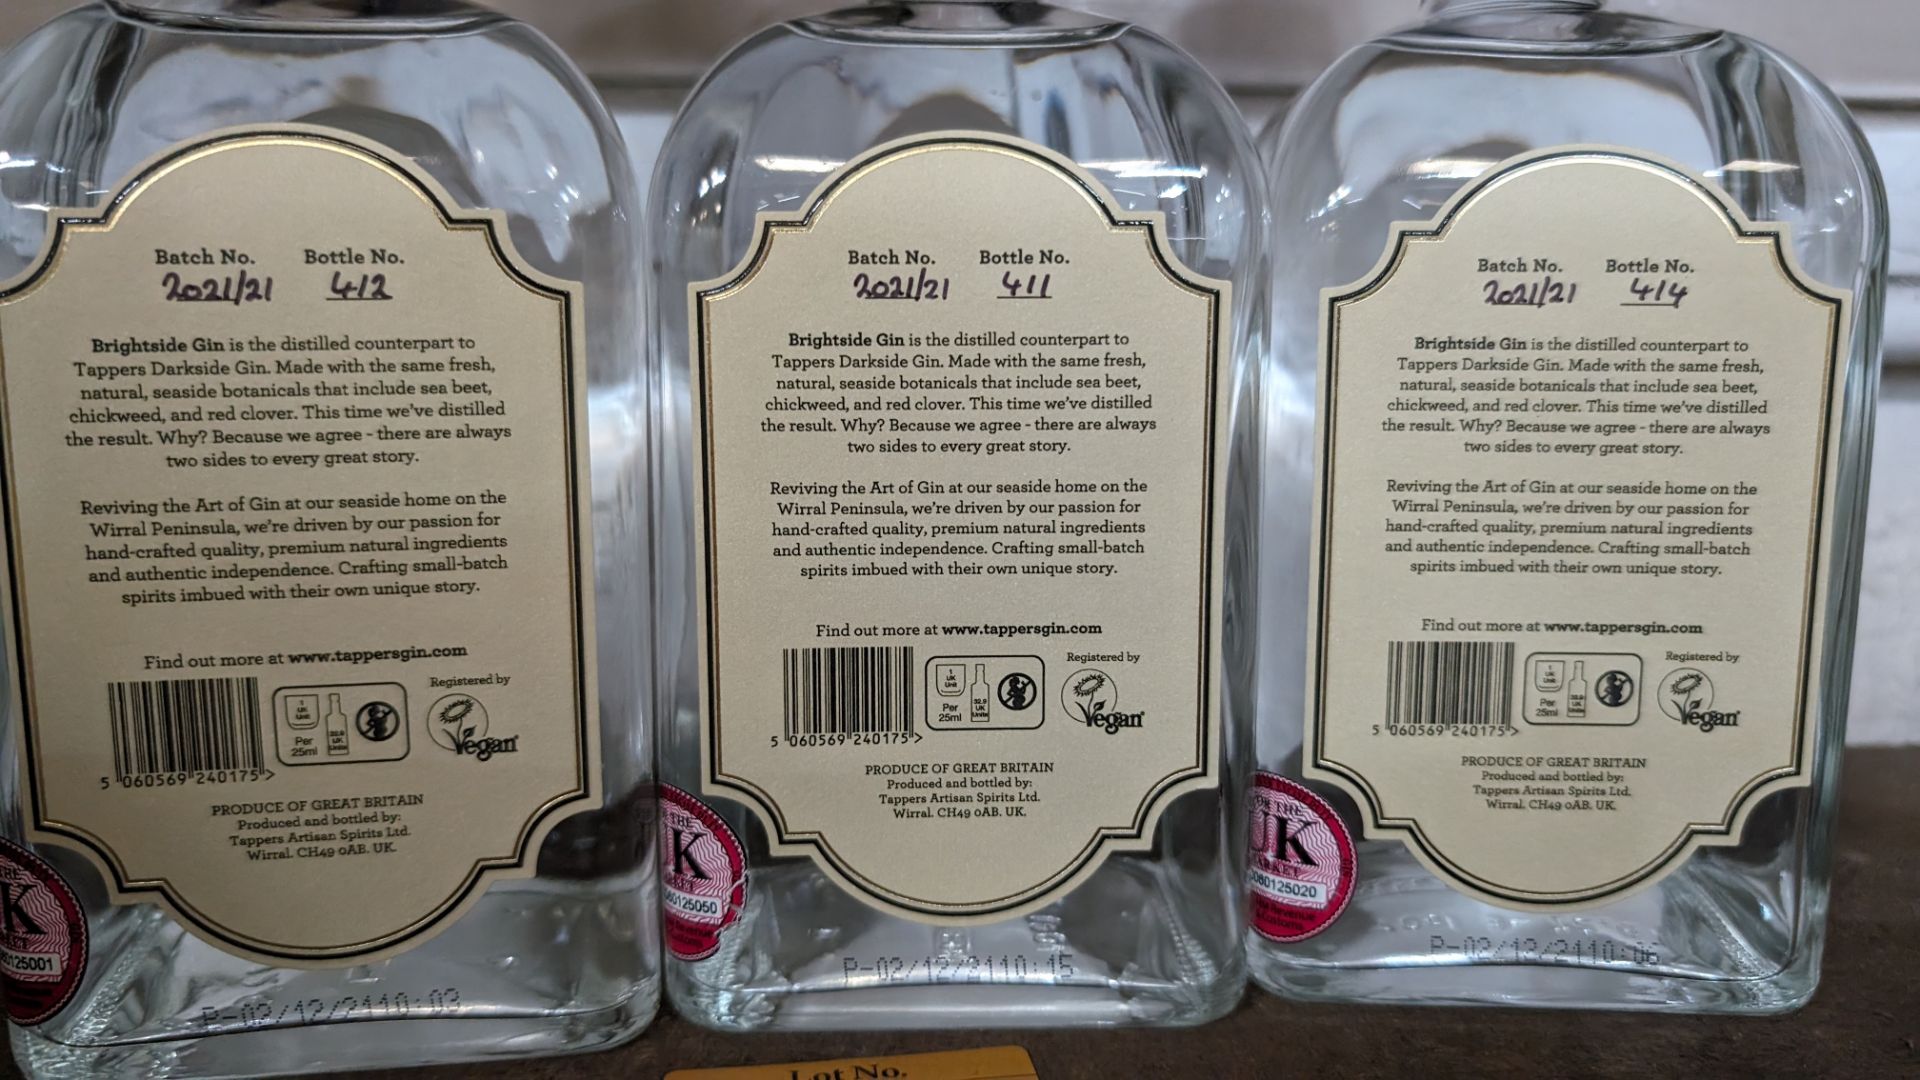 3 off 700ml bottles of Tappers 47% ABV Brightside Coastal London Dry Gin. Individually numbered bot - Image 4 of 4